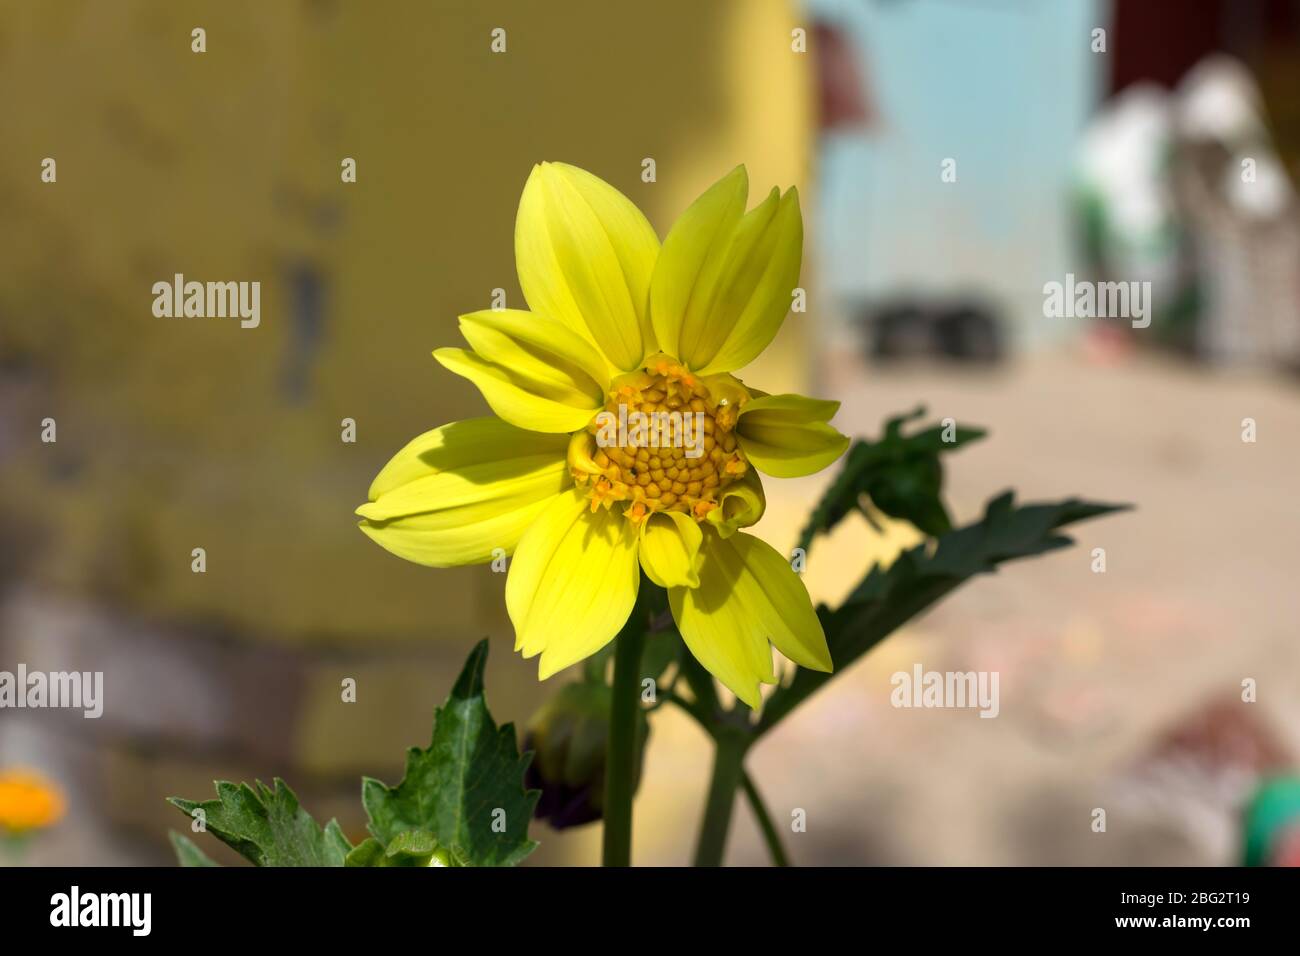 A beautiful yellow dahlia flower in a garden with blurred background. Stock Photo